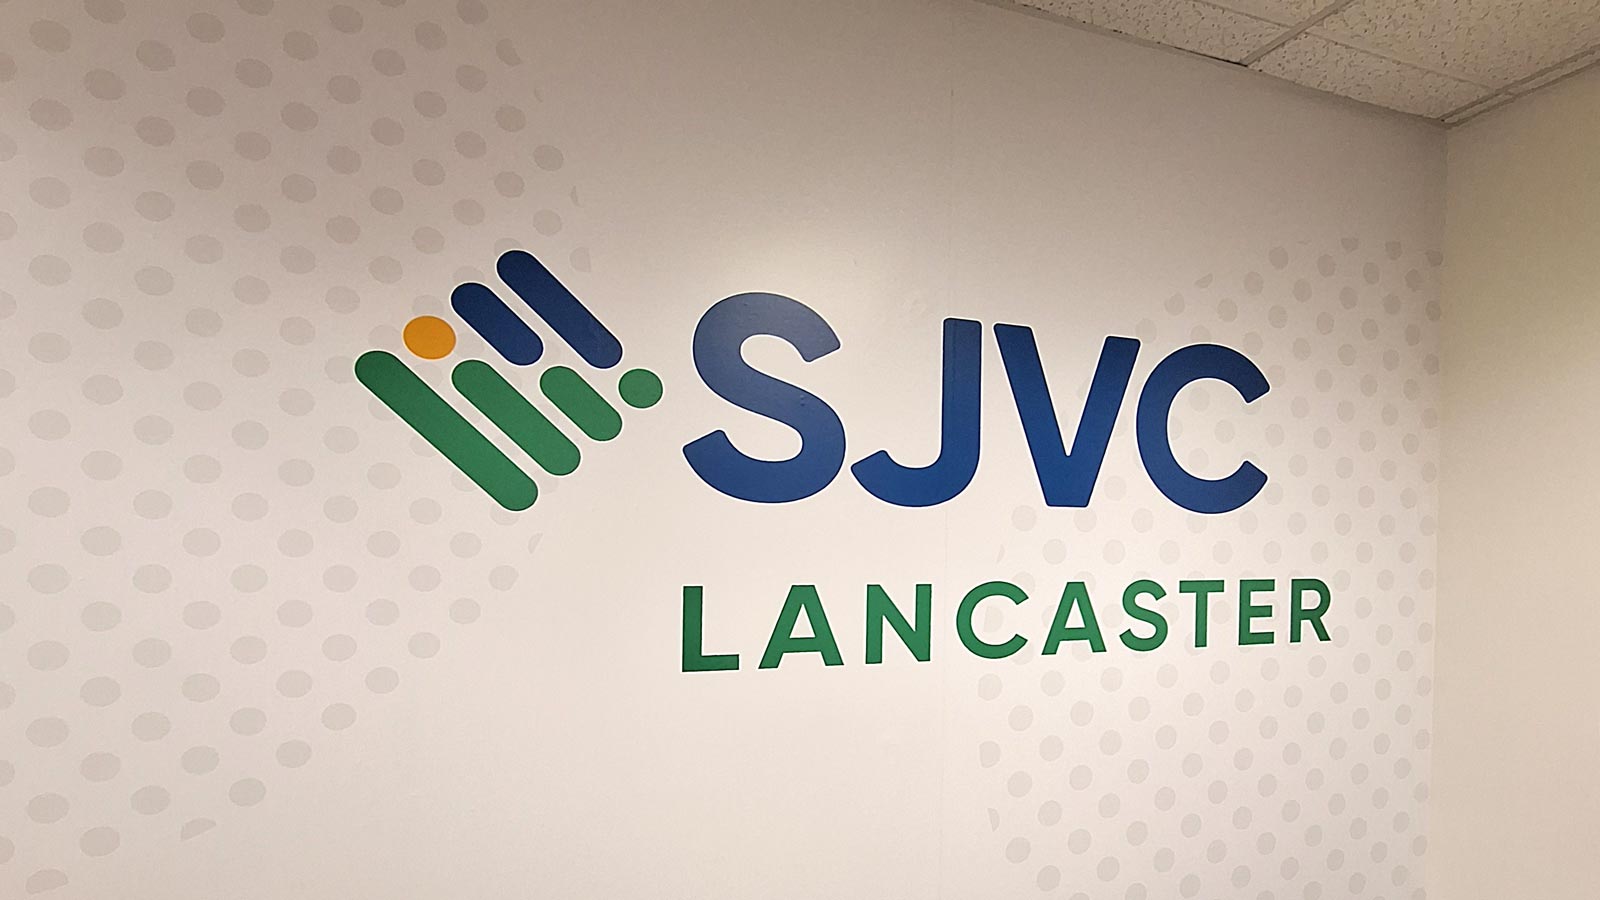 sjvc custom signage applied to the interior wall